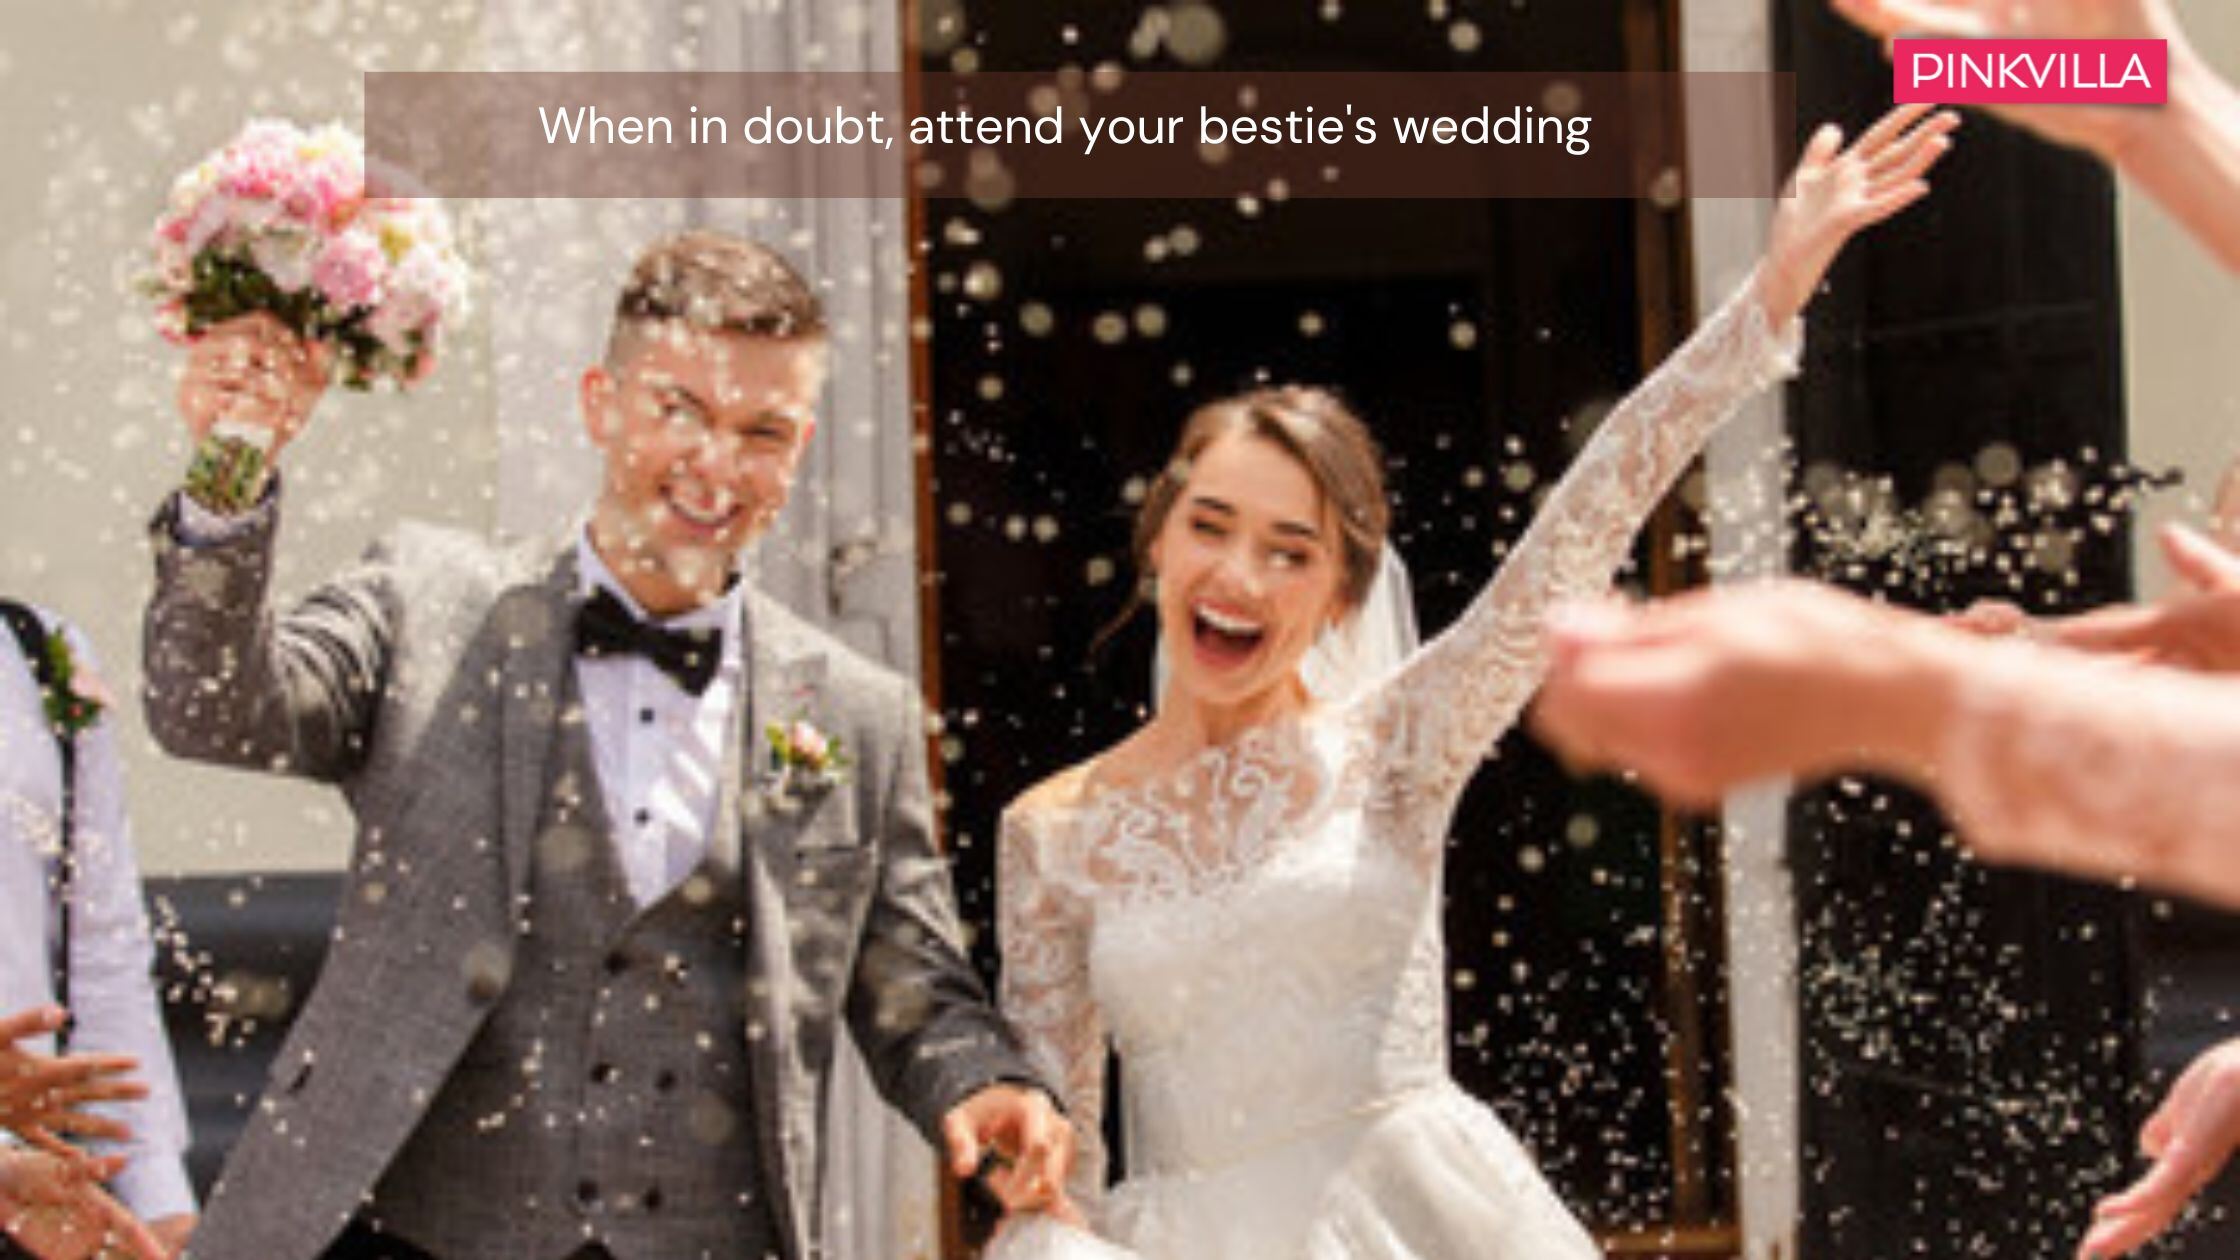 51 Wedding Instagram Captions for the Bride, Groom and Guests